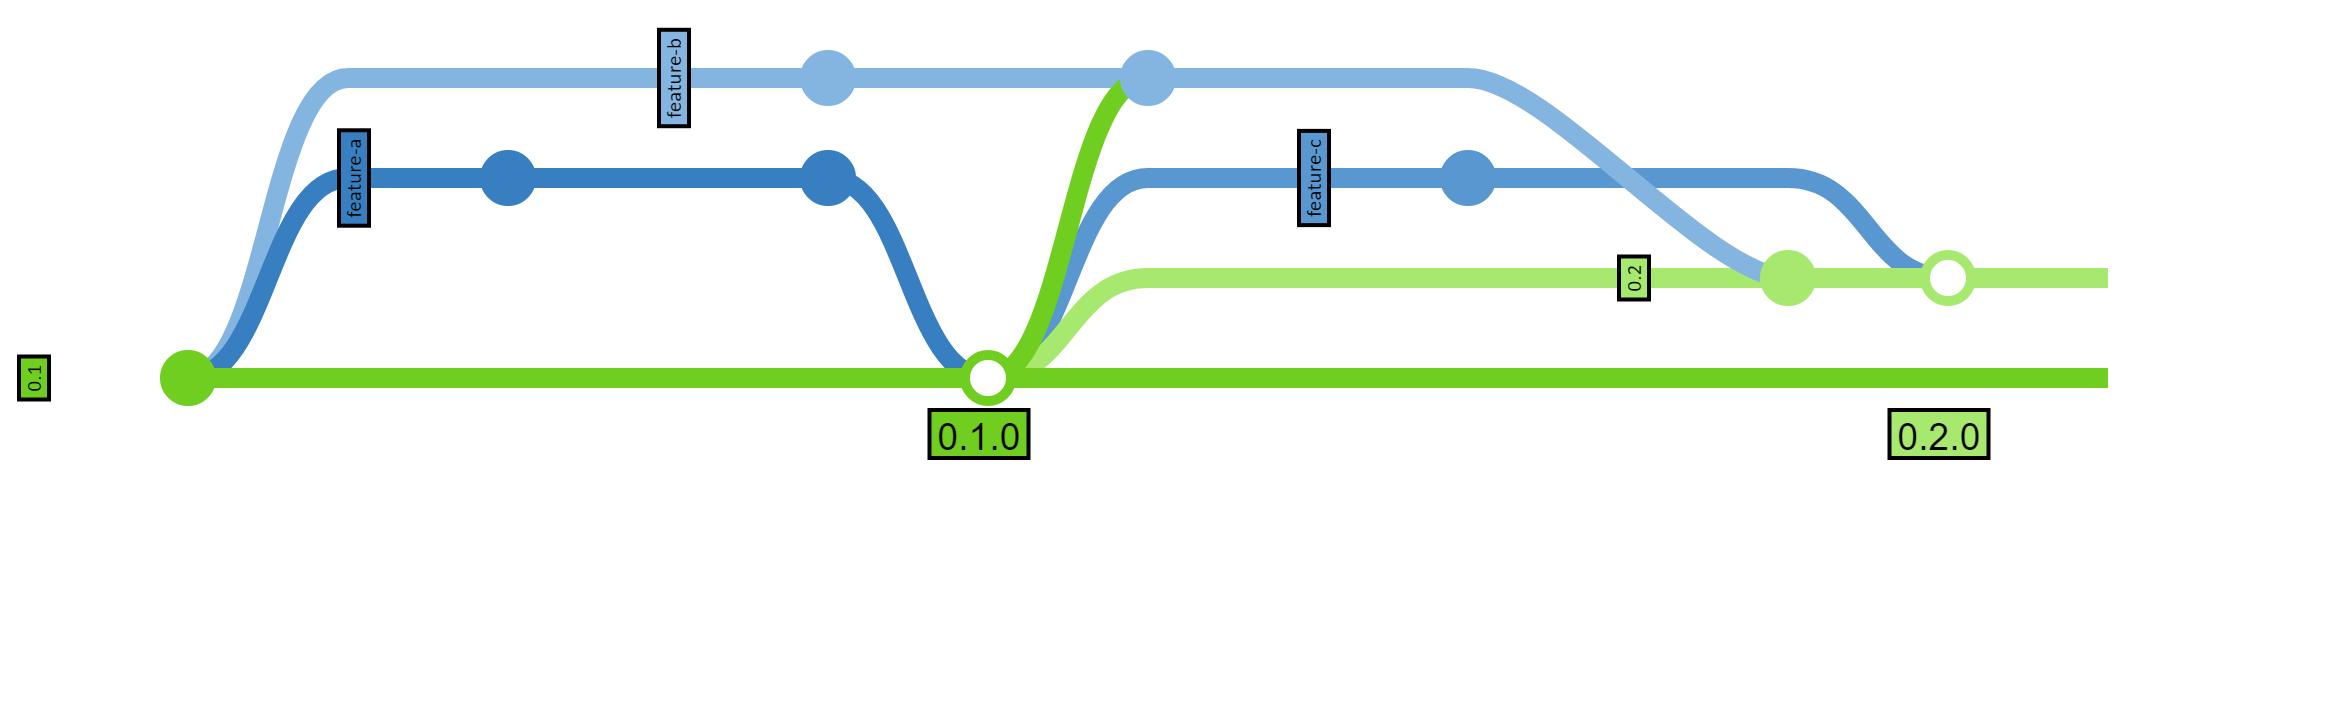 A complex branching diagram showing that a branch that started on the main
line 0.1 can be merged to the main line 0.2.